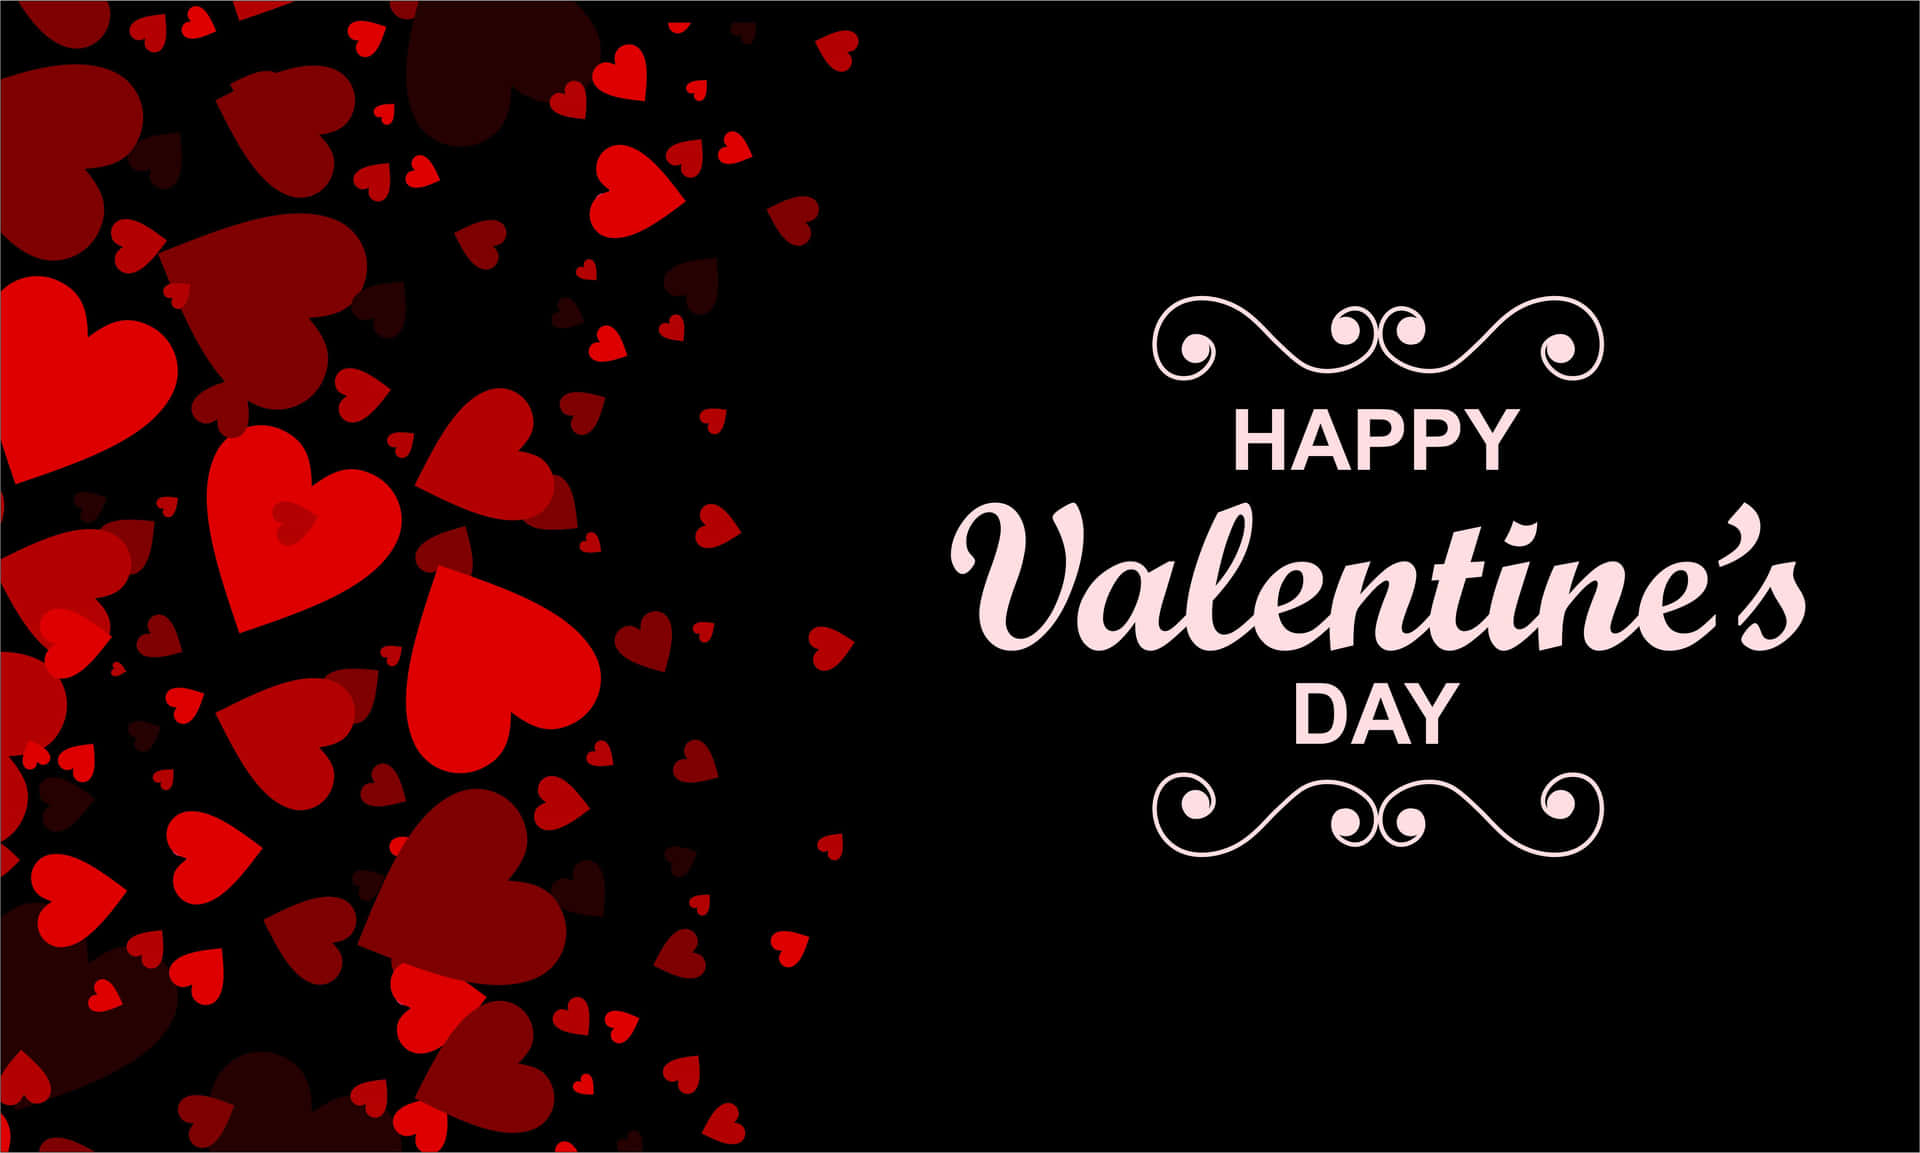 Romantic Valentines Day Background with Heart-Shaped Balloons and Text